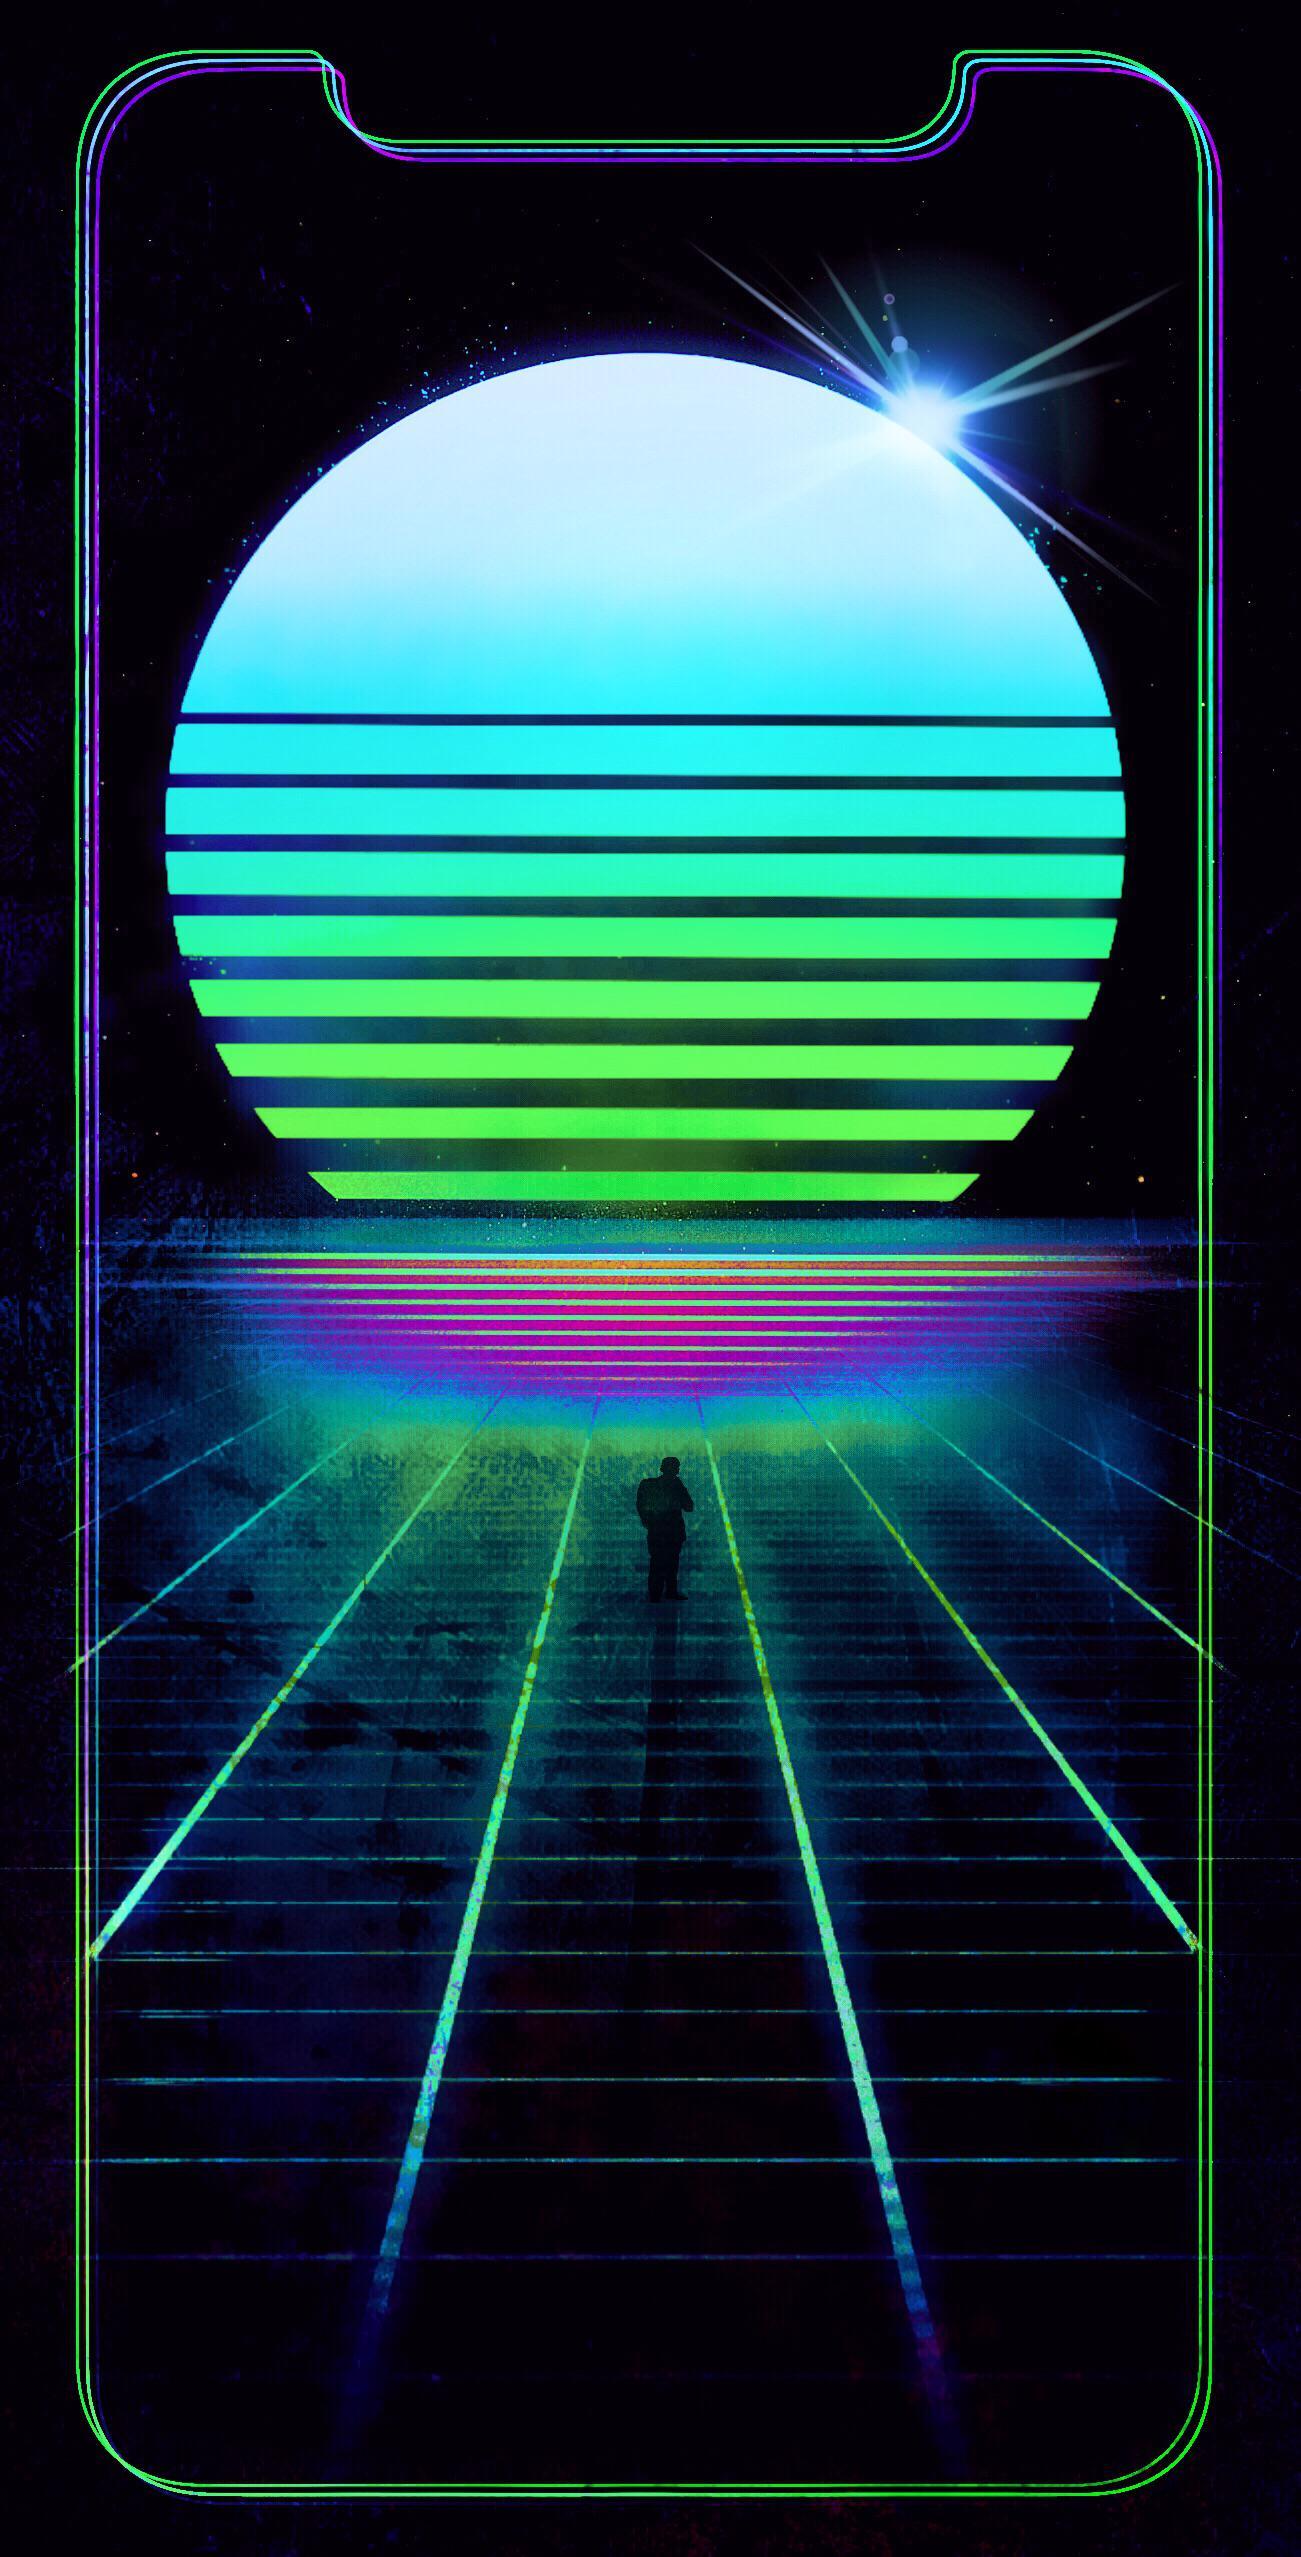 Synthwave iPhone X wallpapers : outrun